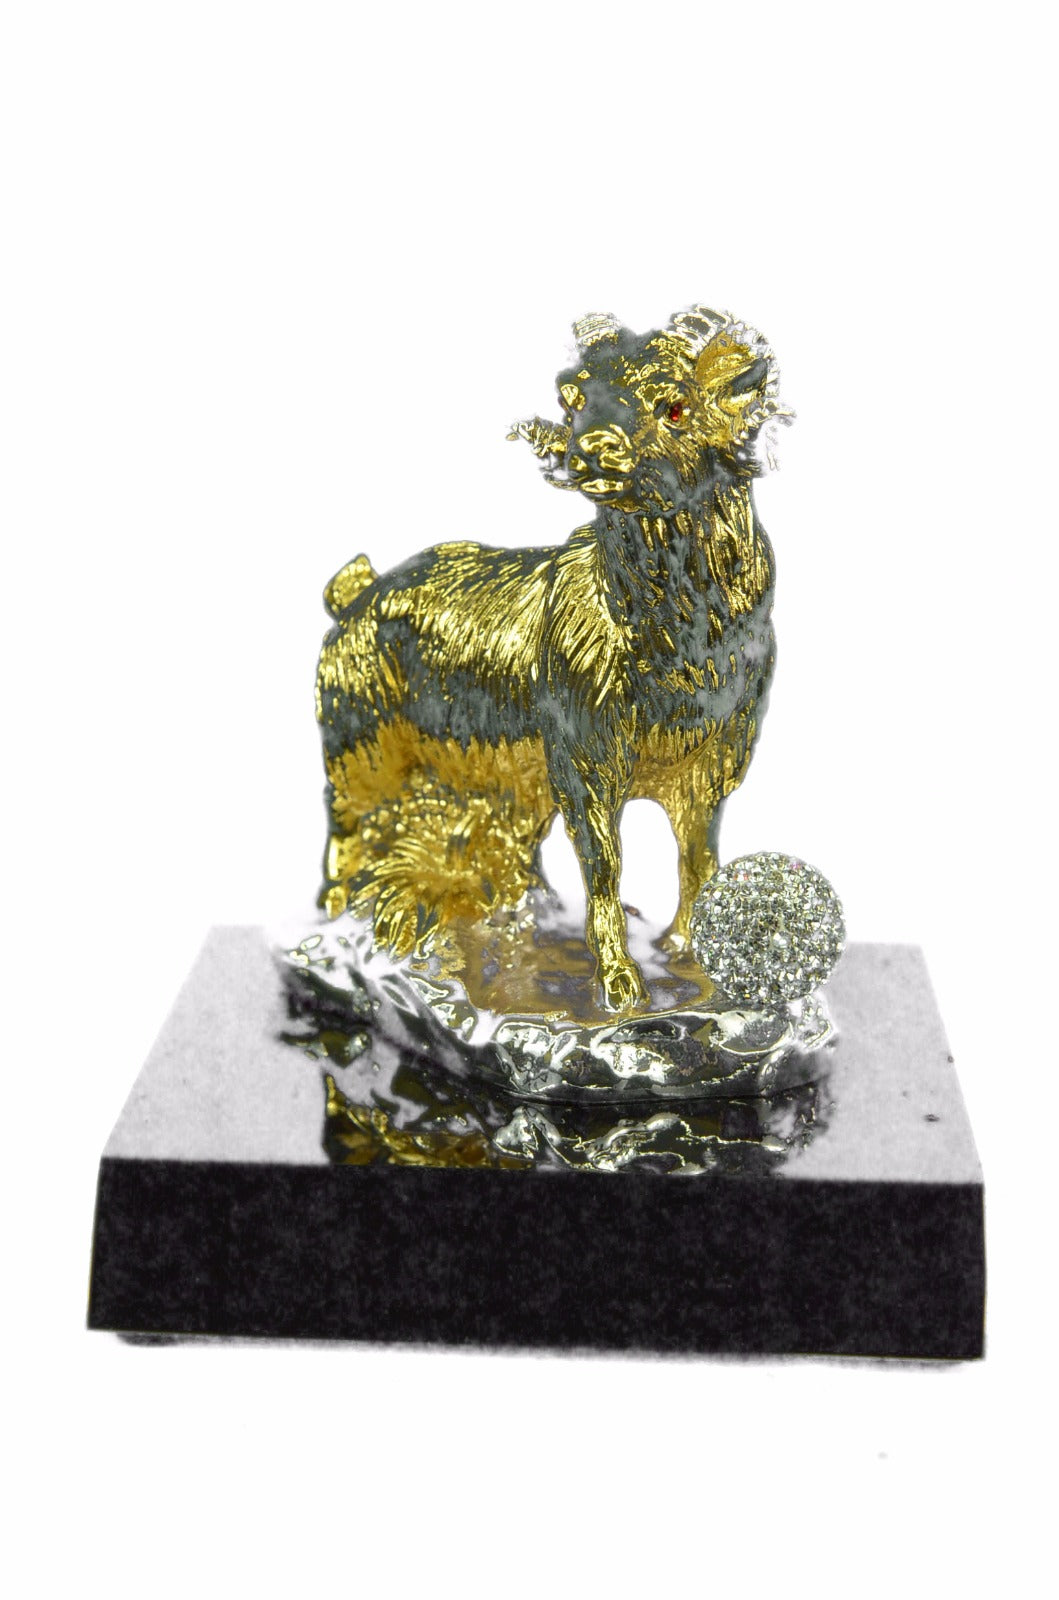 CLEARANCE SALE Metal Shaggy Sheep or Ram Sculpture Statue -24K Gold Patina! Gift